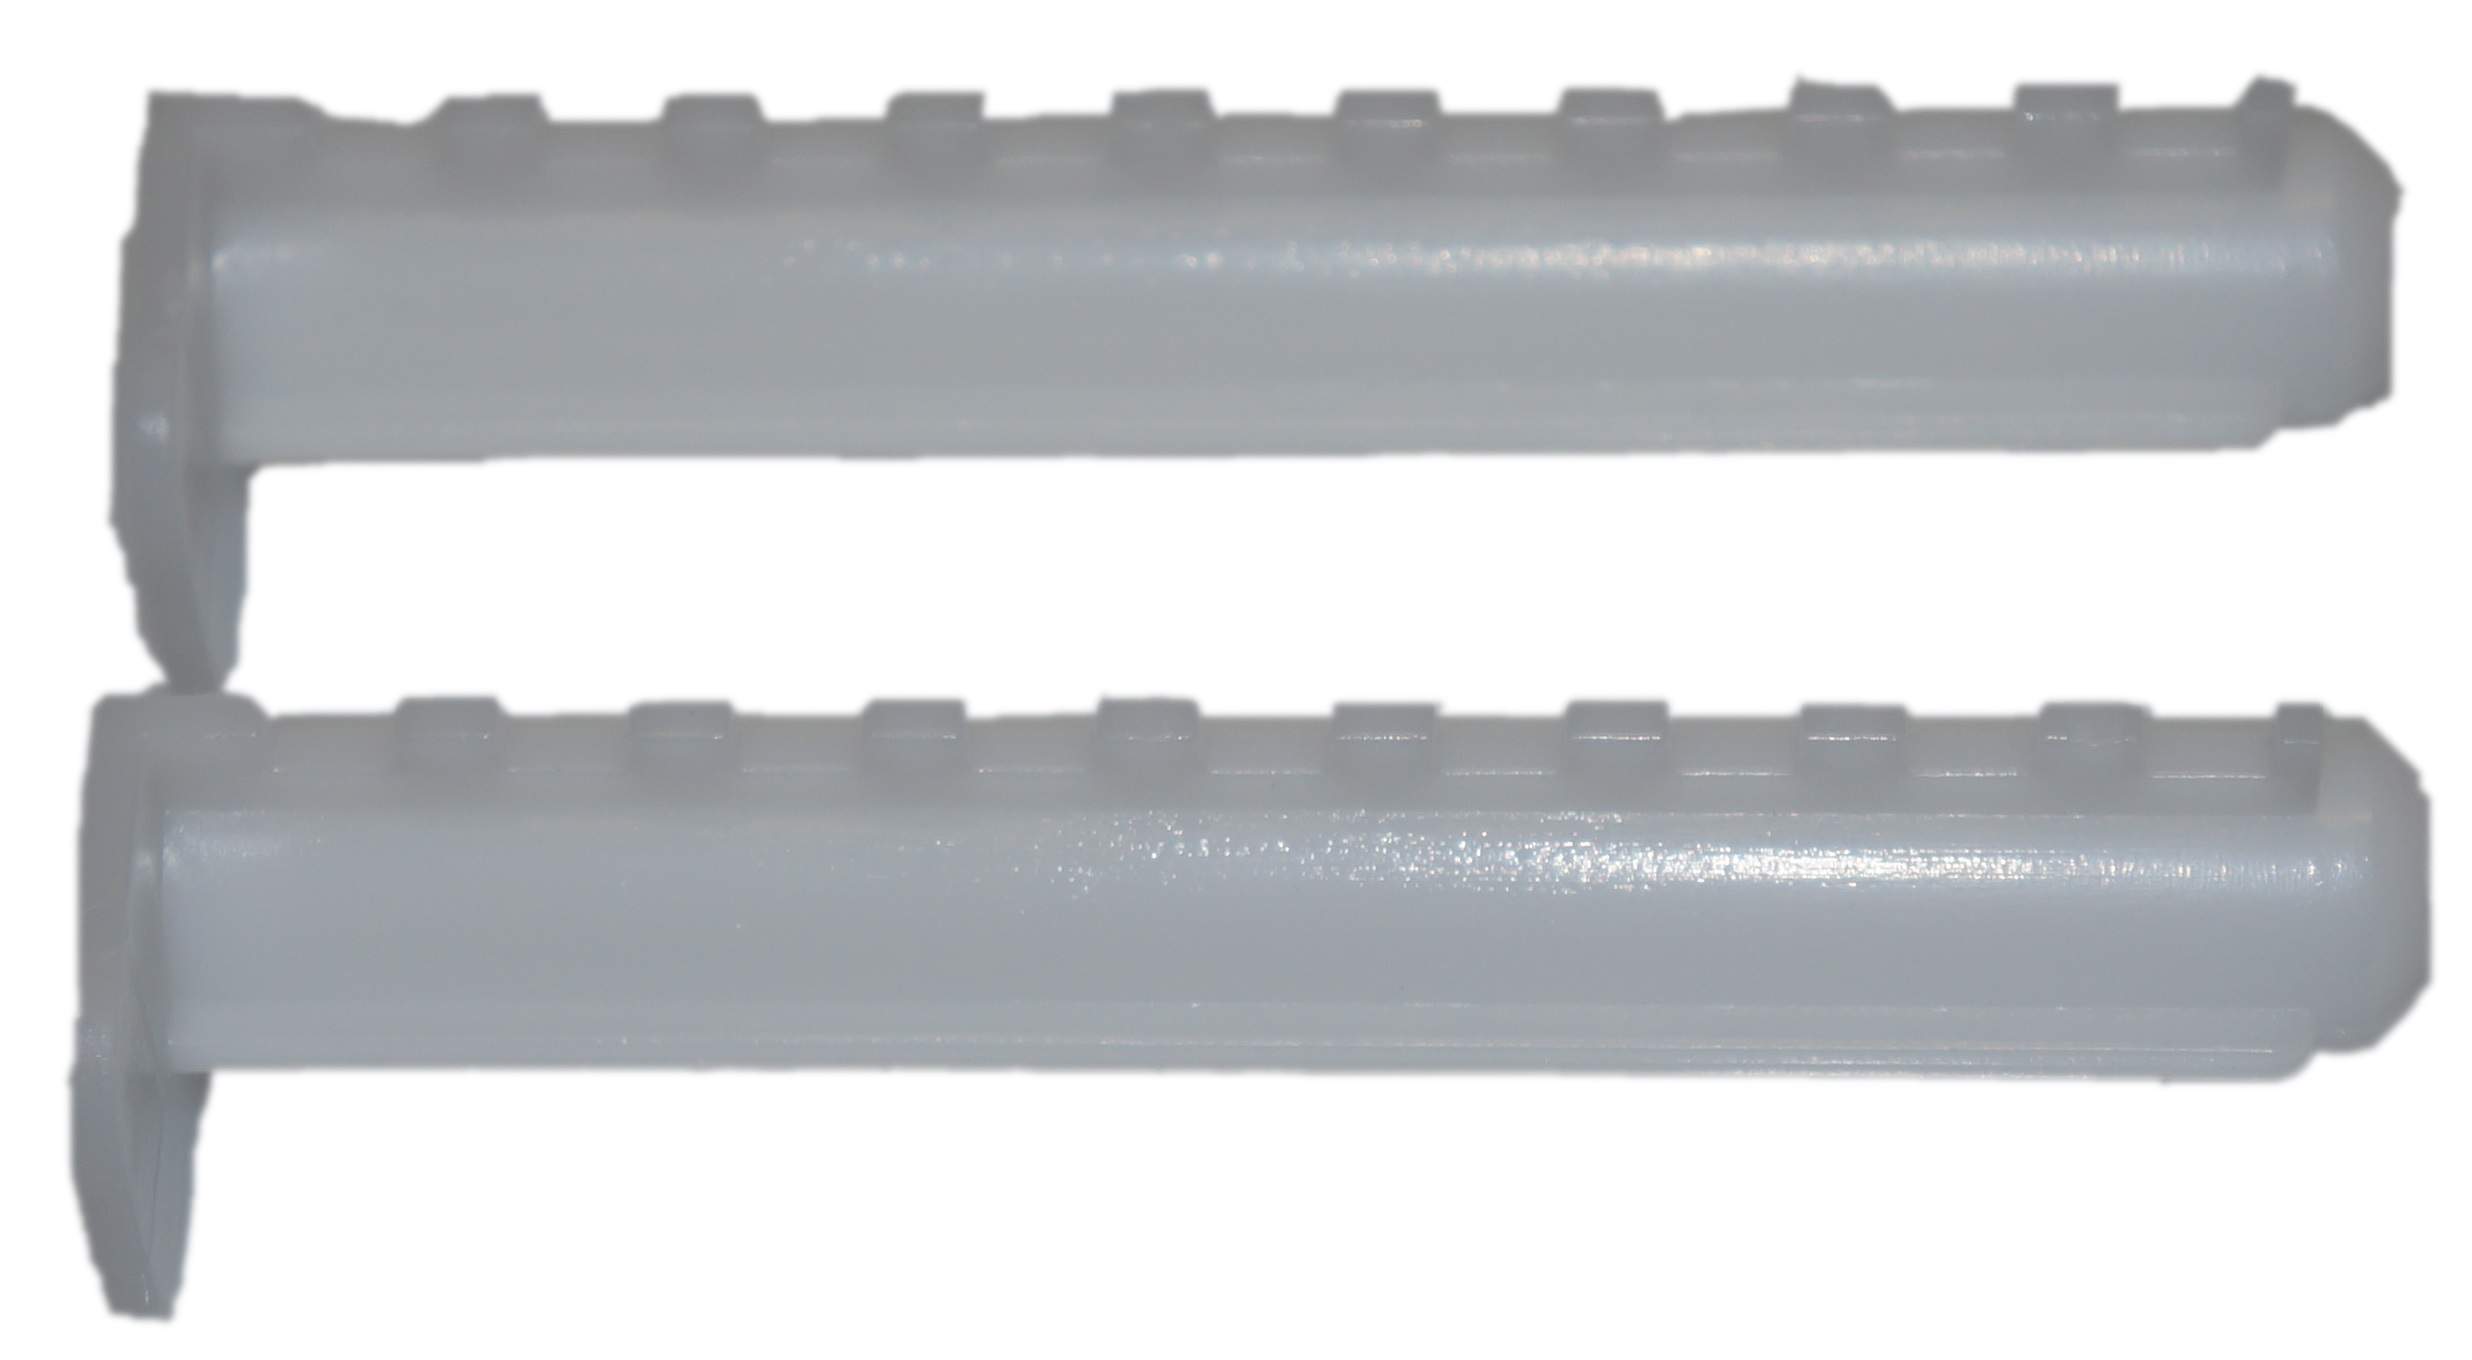 Short spacer for plate attachment